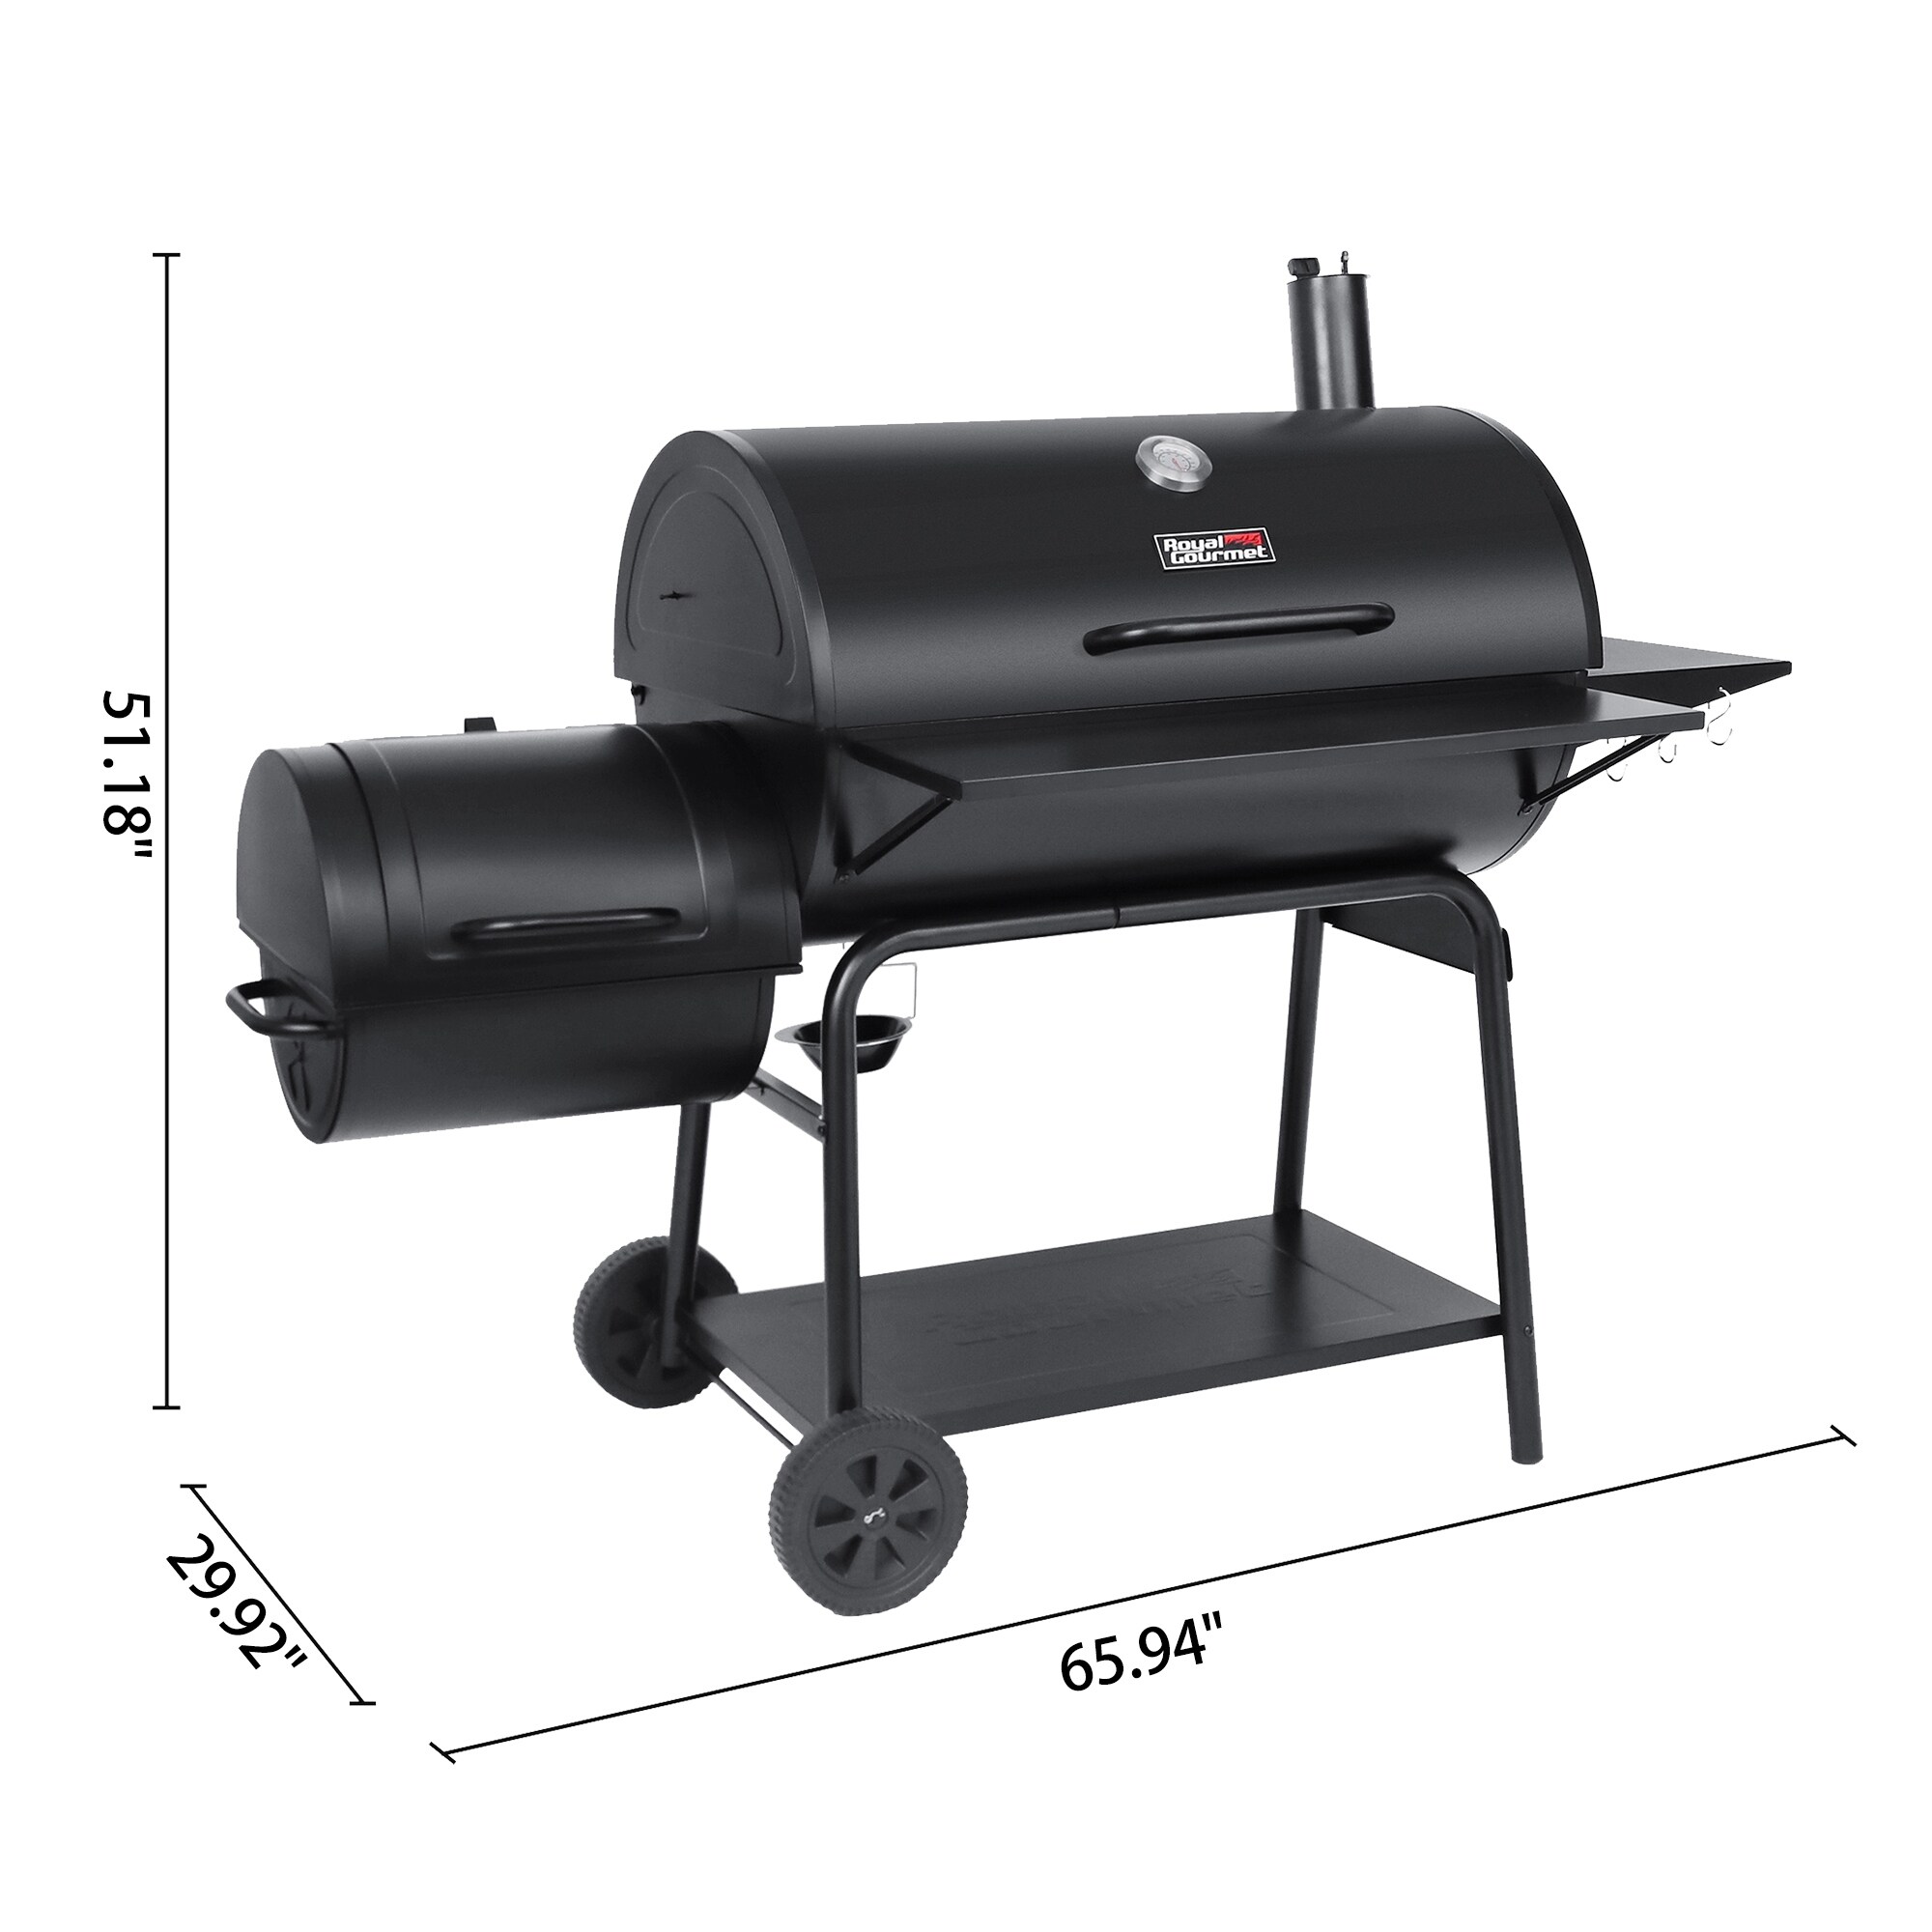 https://ak1.ostkcdn.com/images/products/is/images/direct/c56c22b436c9e450ec9ee4d5cc2bbcc1c2ab9324/oyal-Gourmet-CC2036F-Charcoal-Barrel-Grill-with-Offset-Smoker%2C-1200-Square-Inches-for-Large-Event-Gathering%2C-Black.jpg